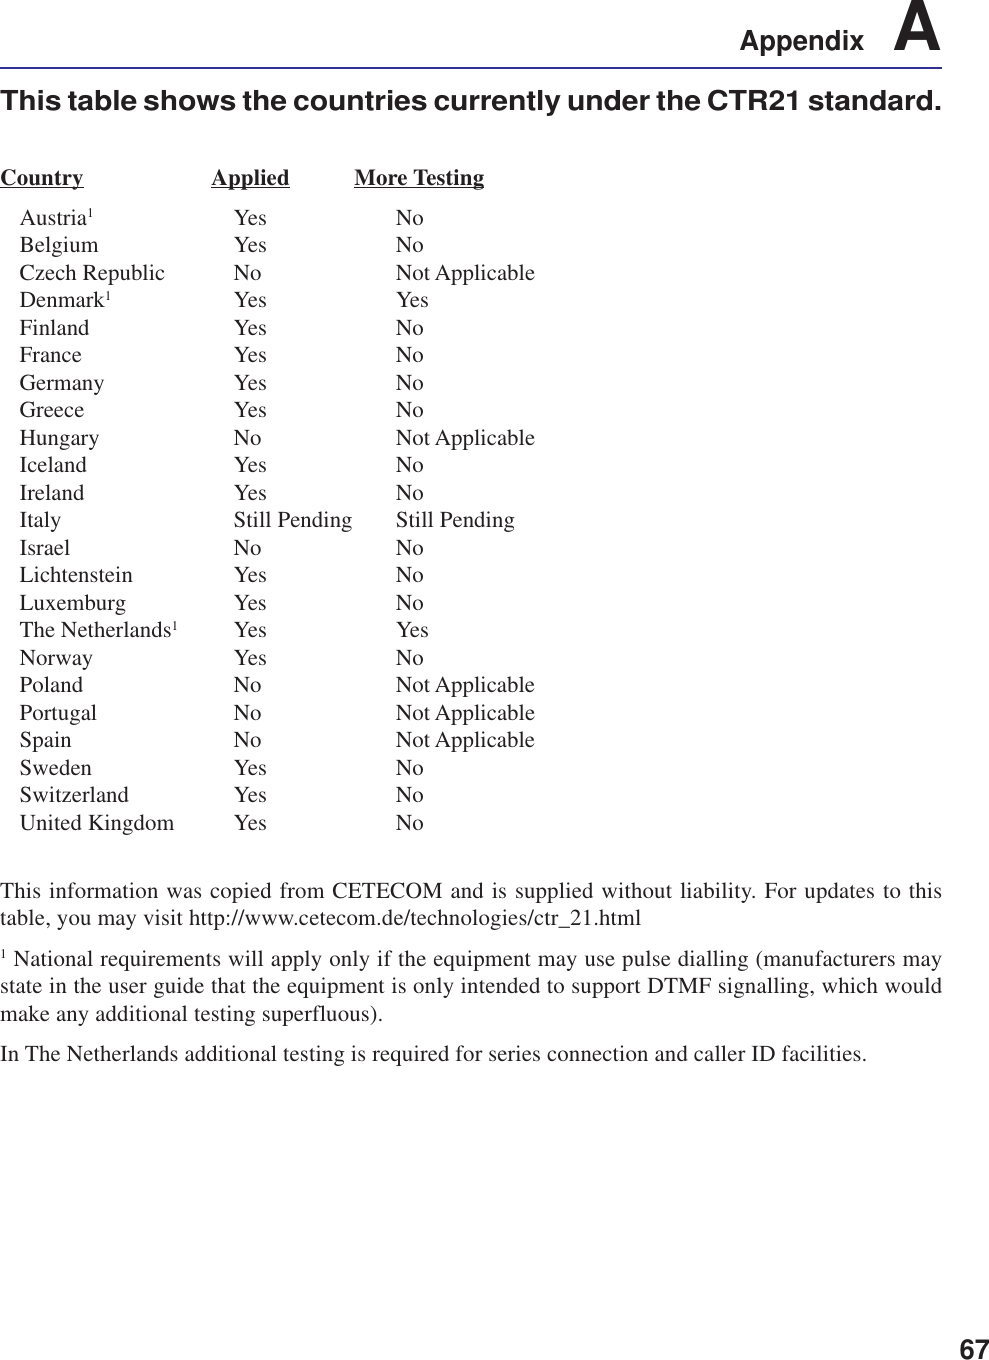 67Appendix    AThis table shows the countries currently under the CTR21 standard.Country     Applied More TestingAustria1Yes NoBelgium Yes NoCzech Republic No Not ApplicableDenmark1Yes YesFinland Yes NoFrance Yes NoGermany Yes NoGreece Yes NoHungary No Not ApplicableIceland Yes NoIreland Yes NoItaly Still Pending Still PendingIsrael No NoLichtenstein Yes NoLuxemburg Yes NoThe Netherlands1Yes YesNorway Yes NoPoland No Not ApplicablePortugal No Not ApplicableSpain No Not ApplicableSweden Yes NoSwitzerland Yes NoUnited Kingdom Yes NoThis information was copied from CETECOM and is supplied without liability. For updates to thistable, you may visit http://www.cetecom.de/technologies/ctr_21.html1 National requirements will apply only if the equipment may use pulse dialling (manufacturers maystate in the user guide that the equipment is only intended to support DTMF signalling, which wouldmake any additional testing superfluous).In The Netherlands additional testing is required for series connection and caller ID facilities.